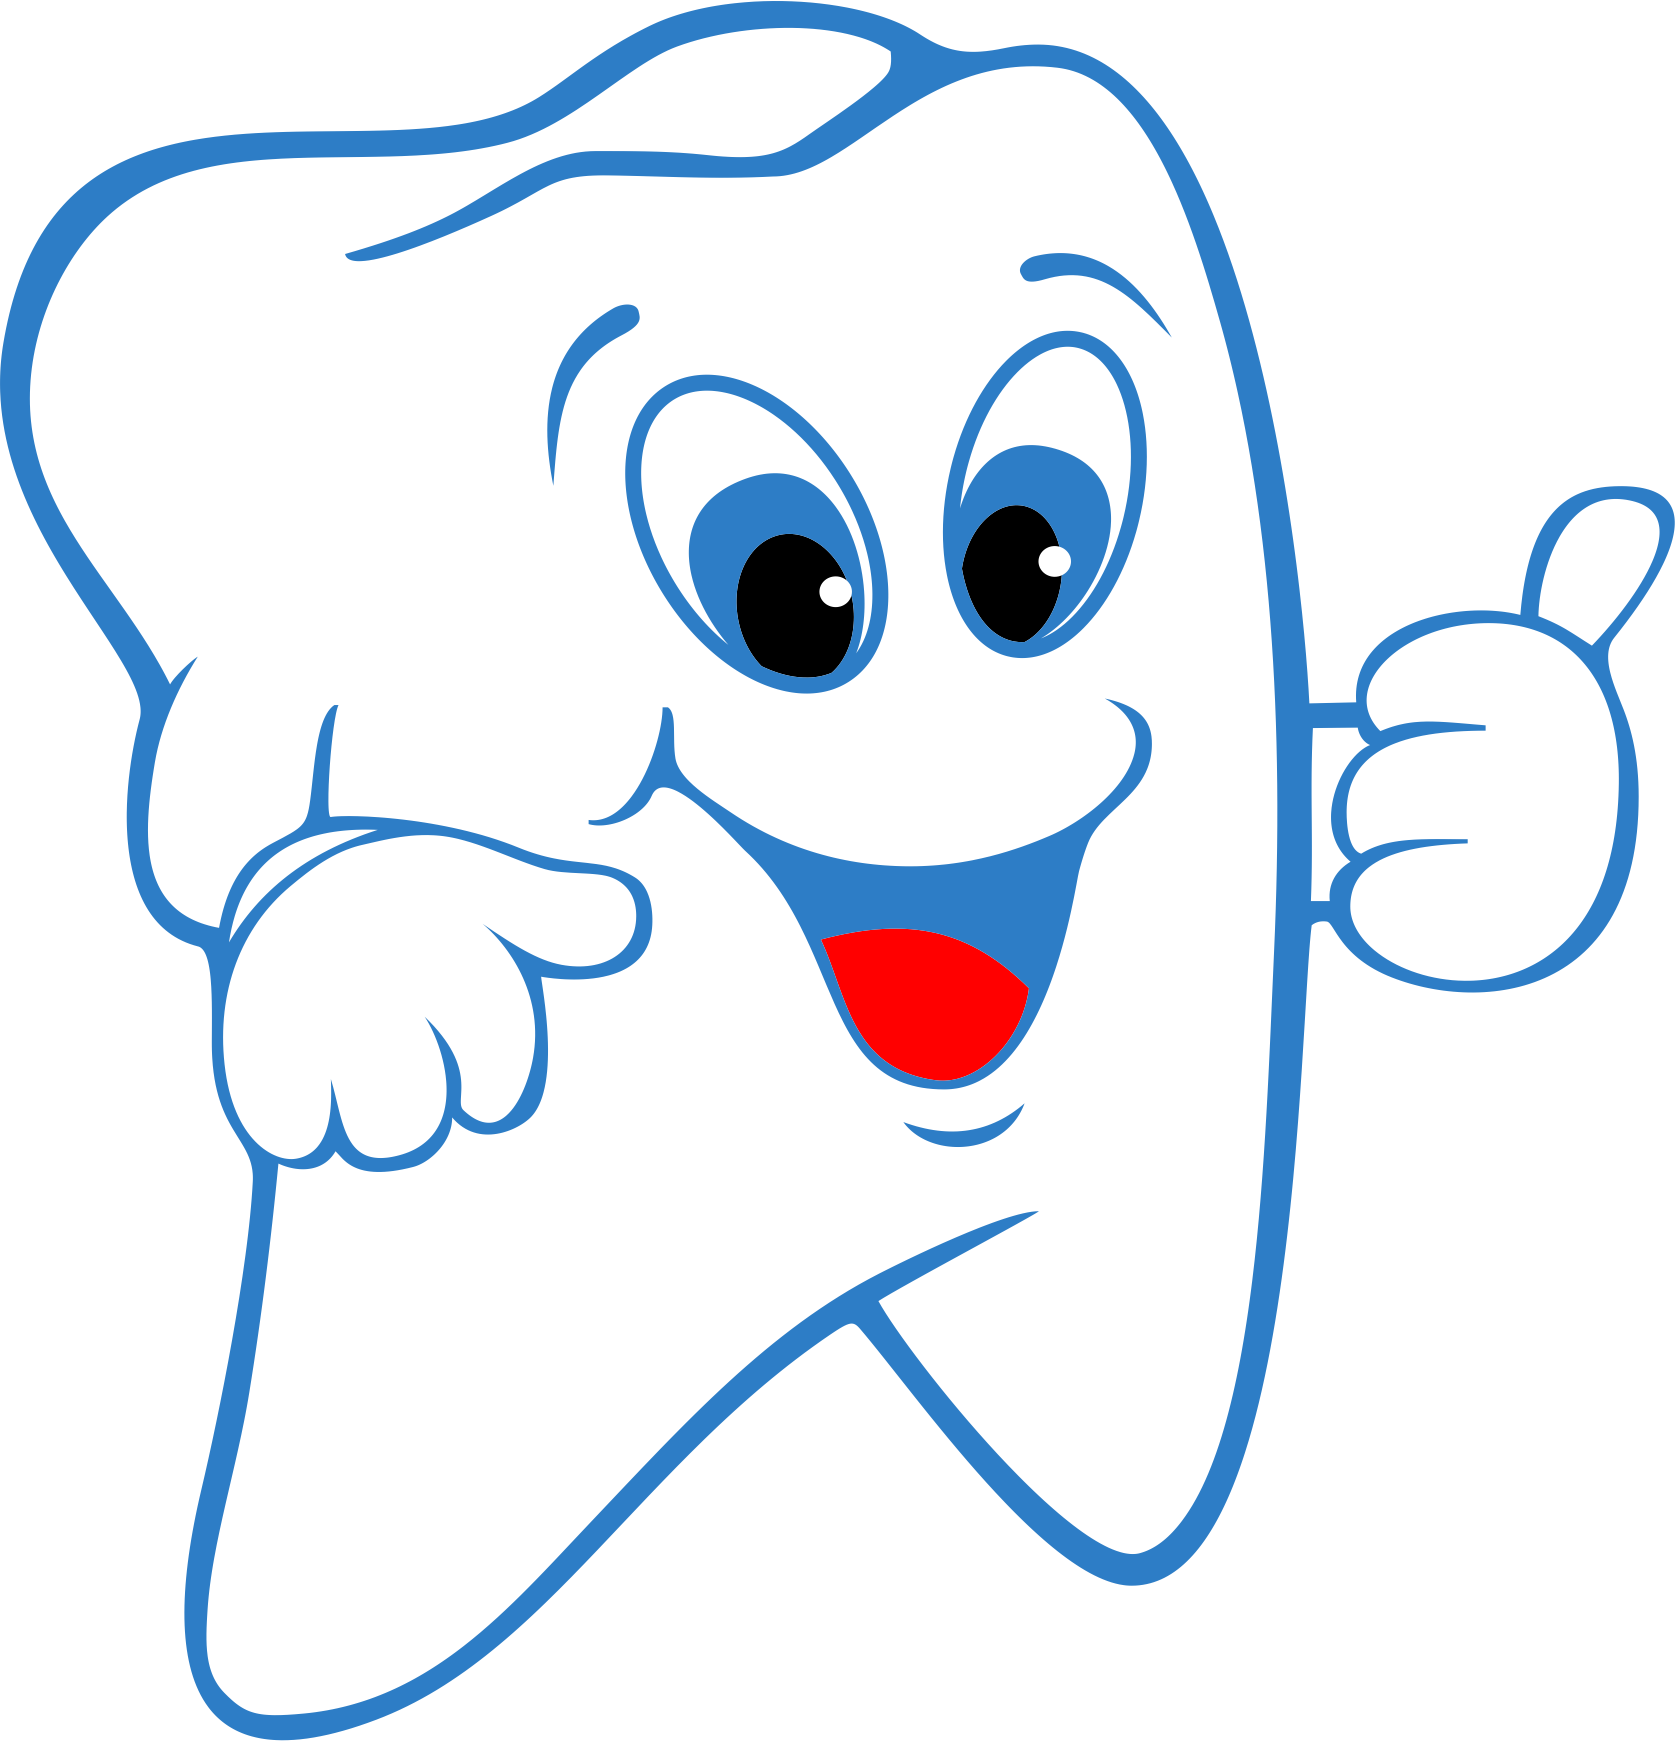 Toothfairy on tooth fairy clip art and dental image